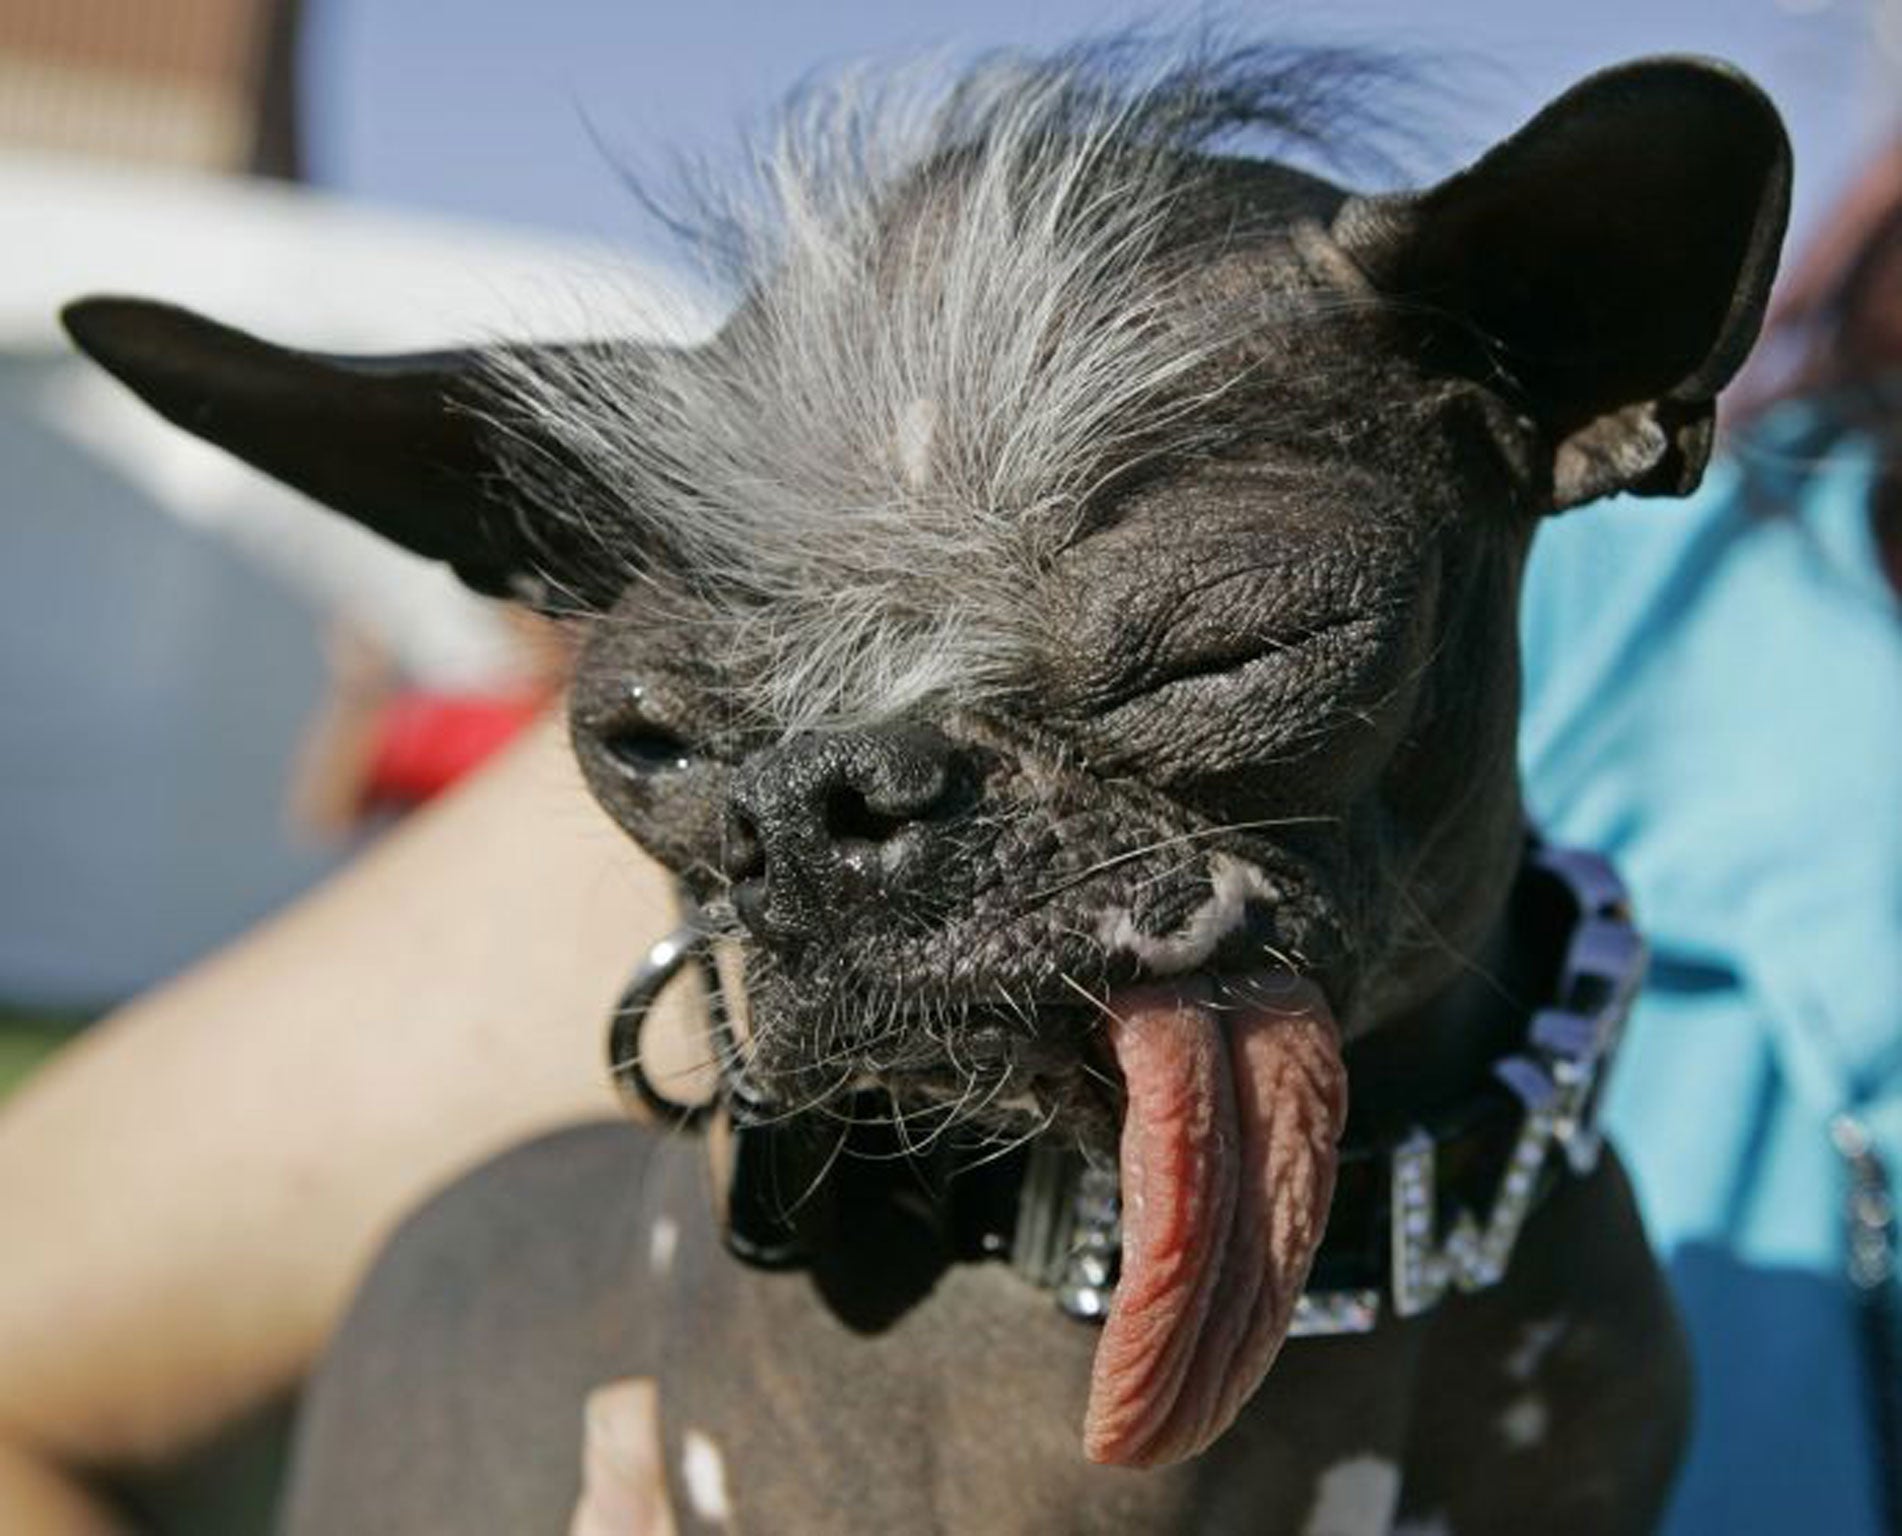 The Chinese Crested and Chihuahua mix dog Elwood, pictured at the 2007 World's Ugliest Dog Contest in California